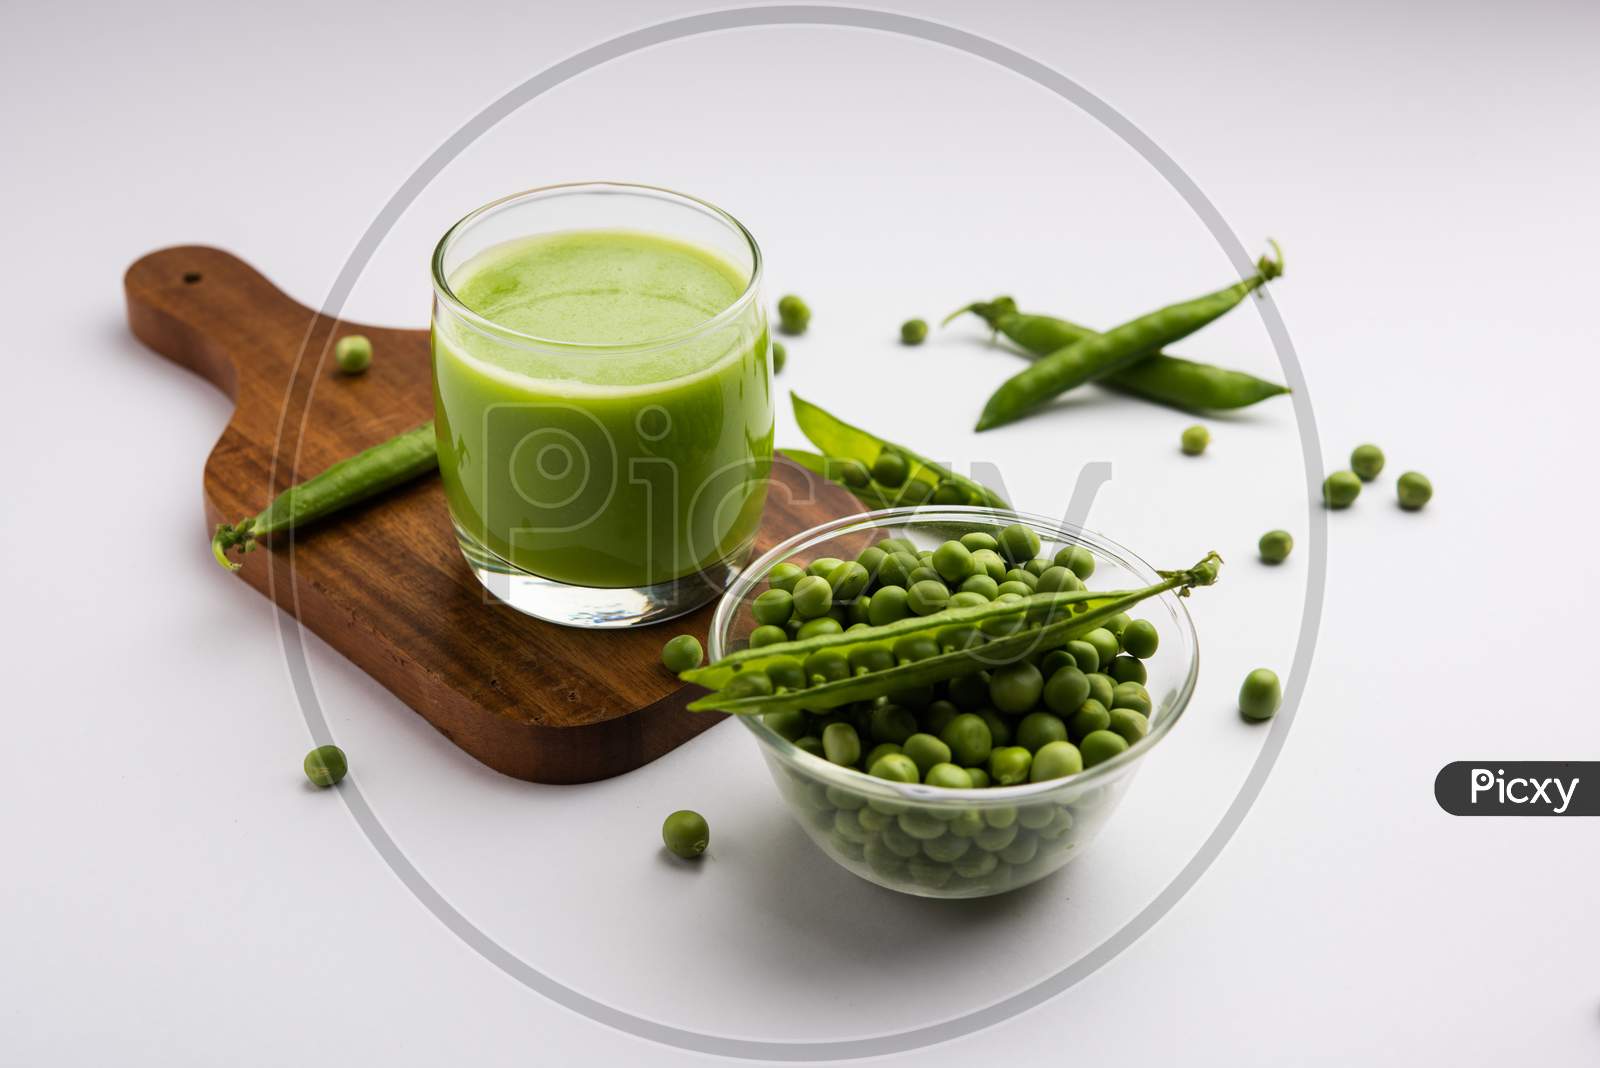 Healthy Green Peas Juice Or Shake Or Beverage Served In A Glass